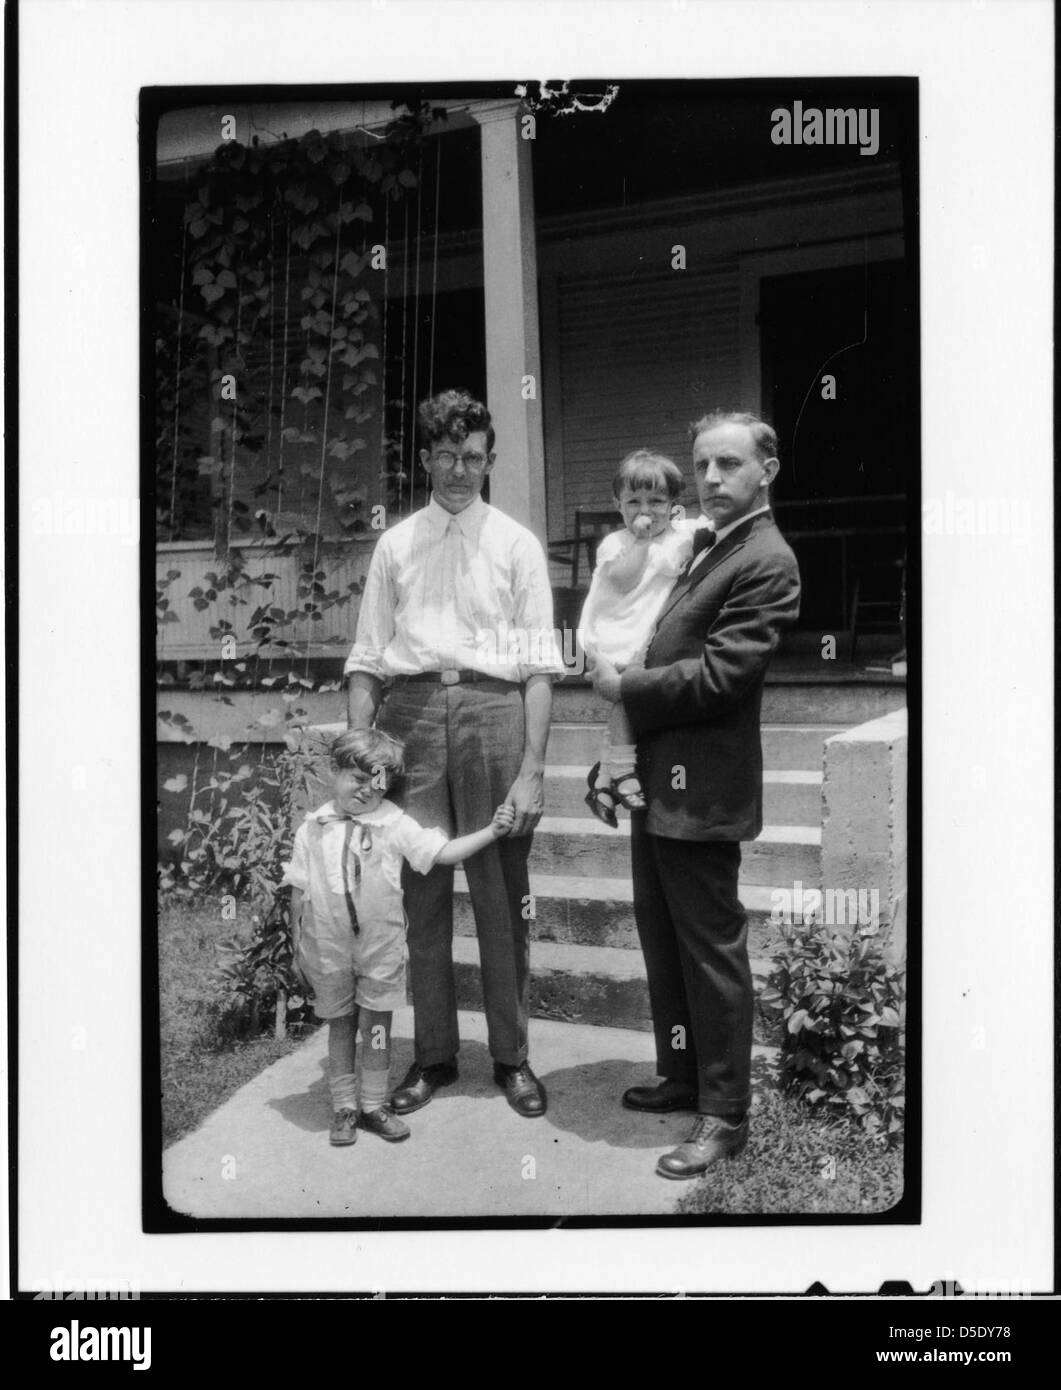 Tennessee v. John T. Scopes Trial: Howard Gale Byrd, Charles Francis Potter, with Byrd's children John and Lillian, in front of Byrd's parsonage in Dayton, Tennessee. Stock Photo